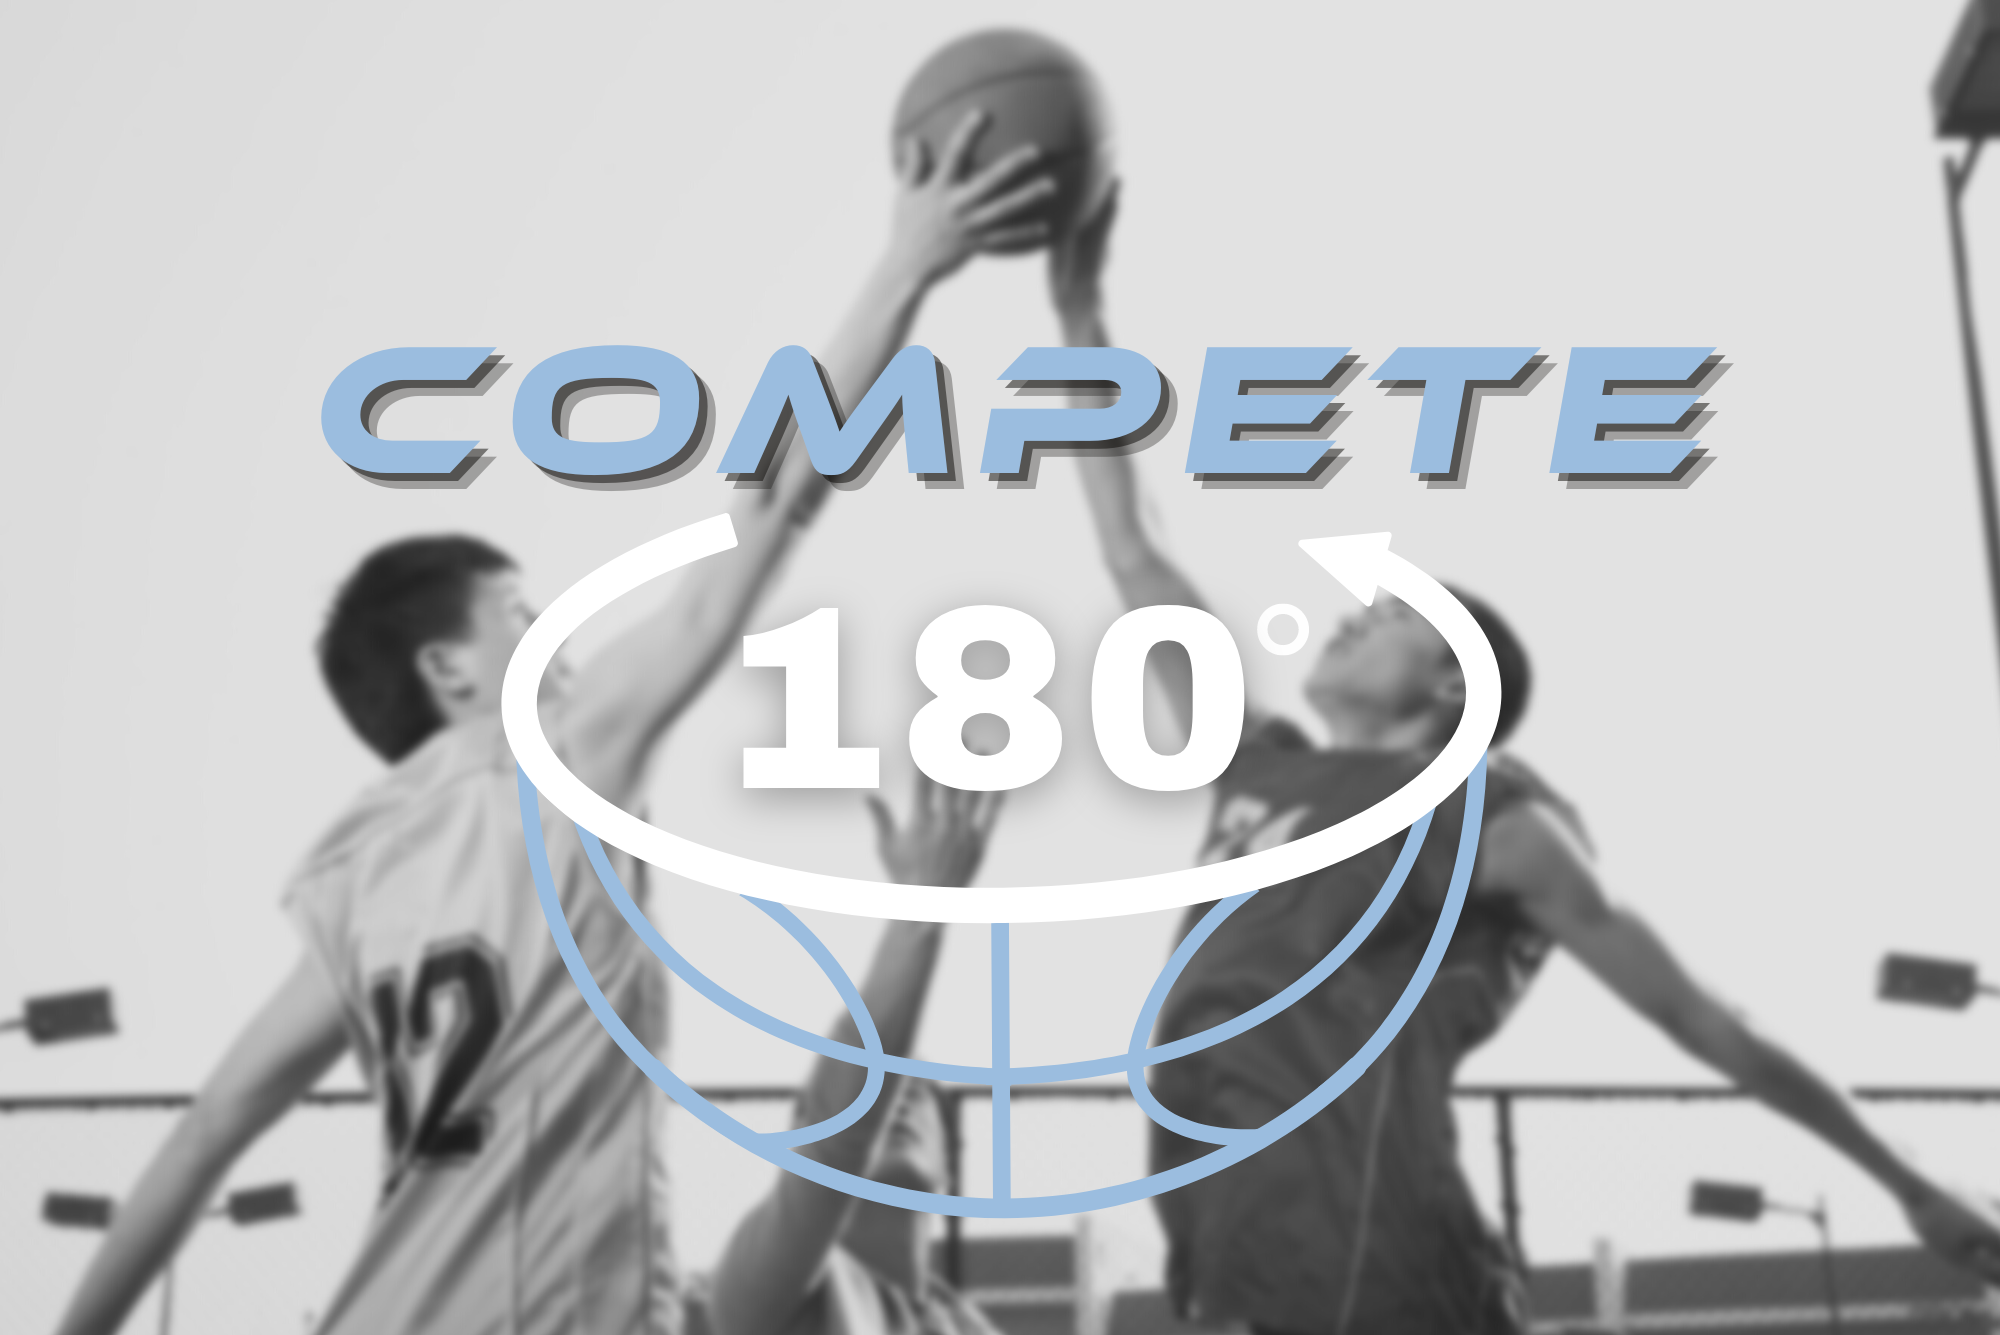 Compete 180 Basketball Training